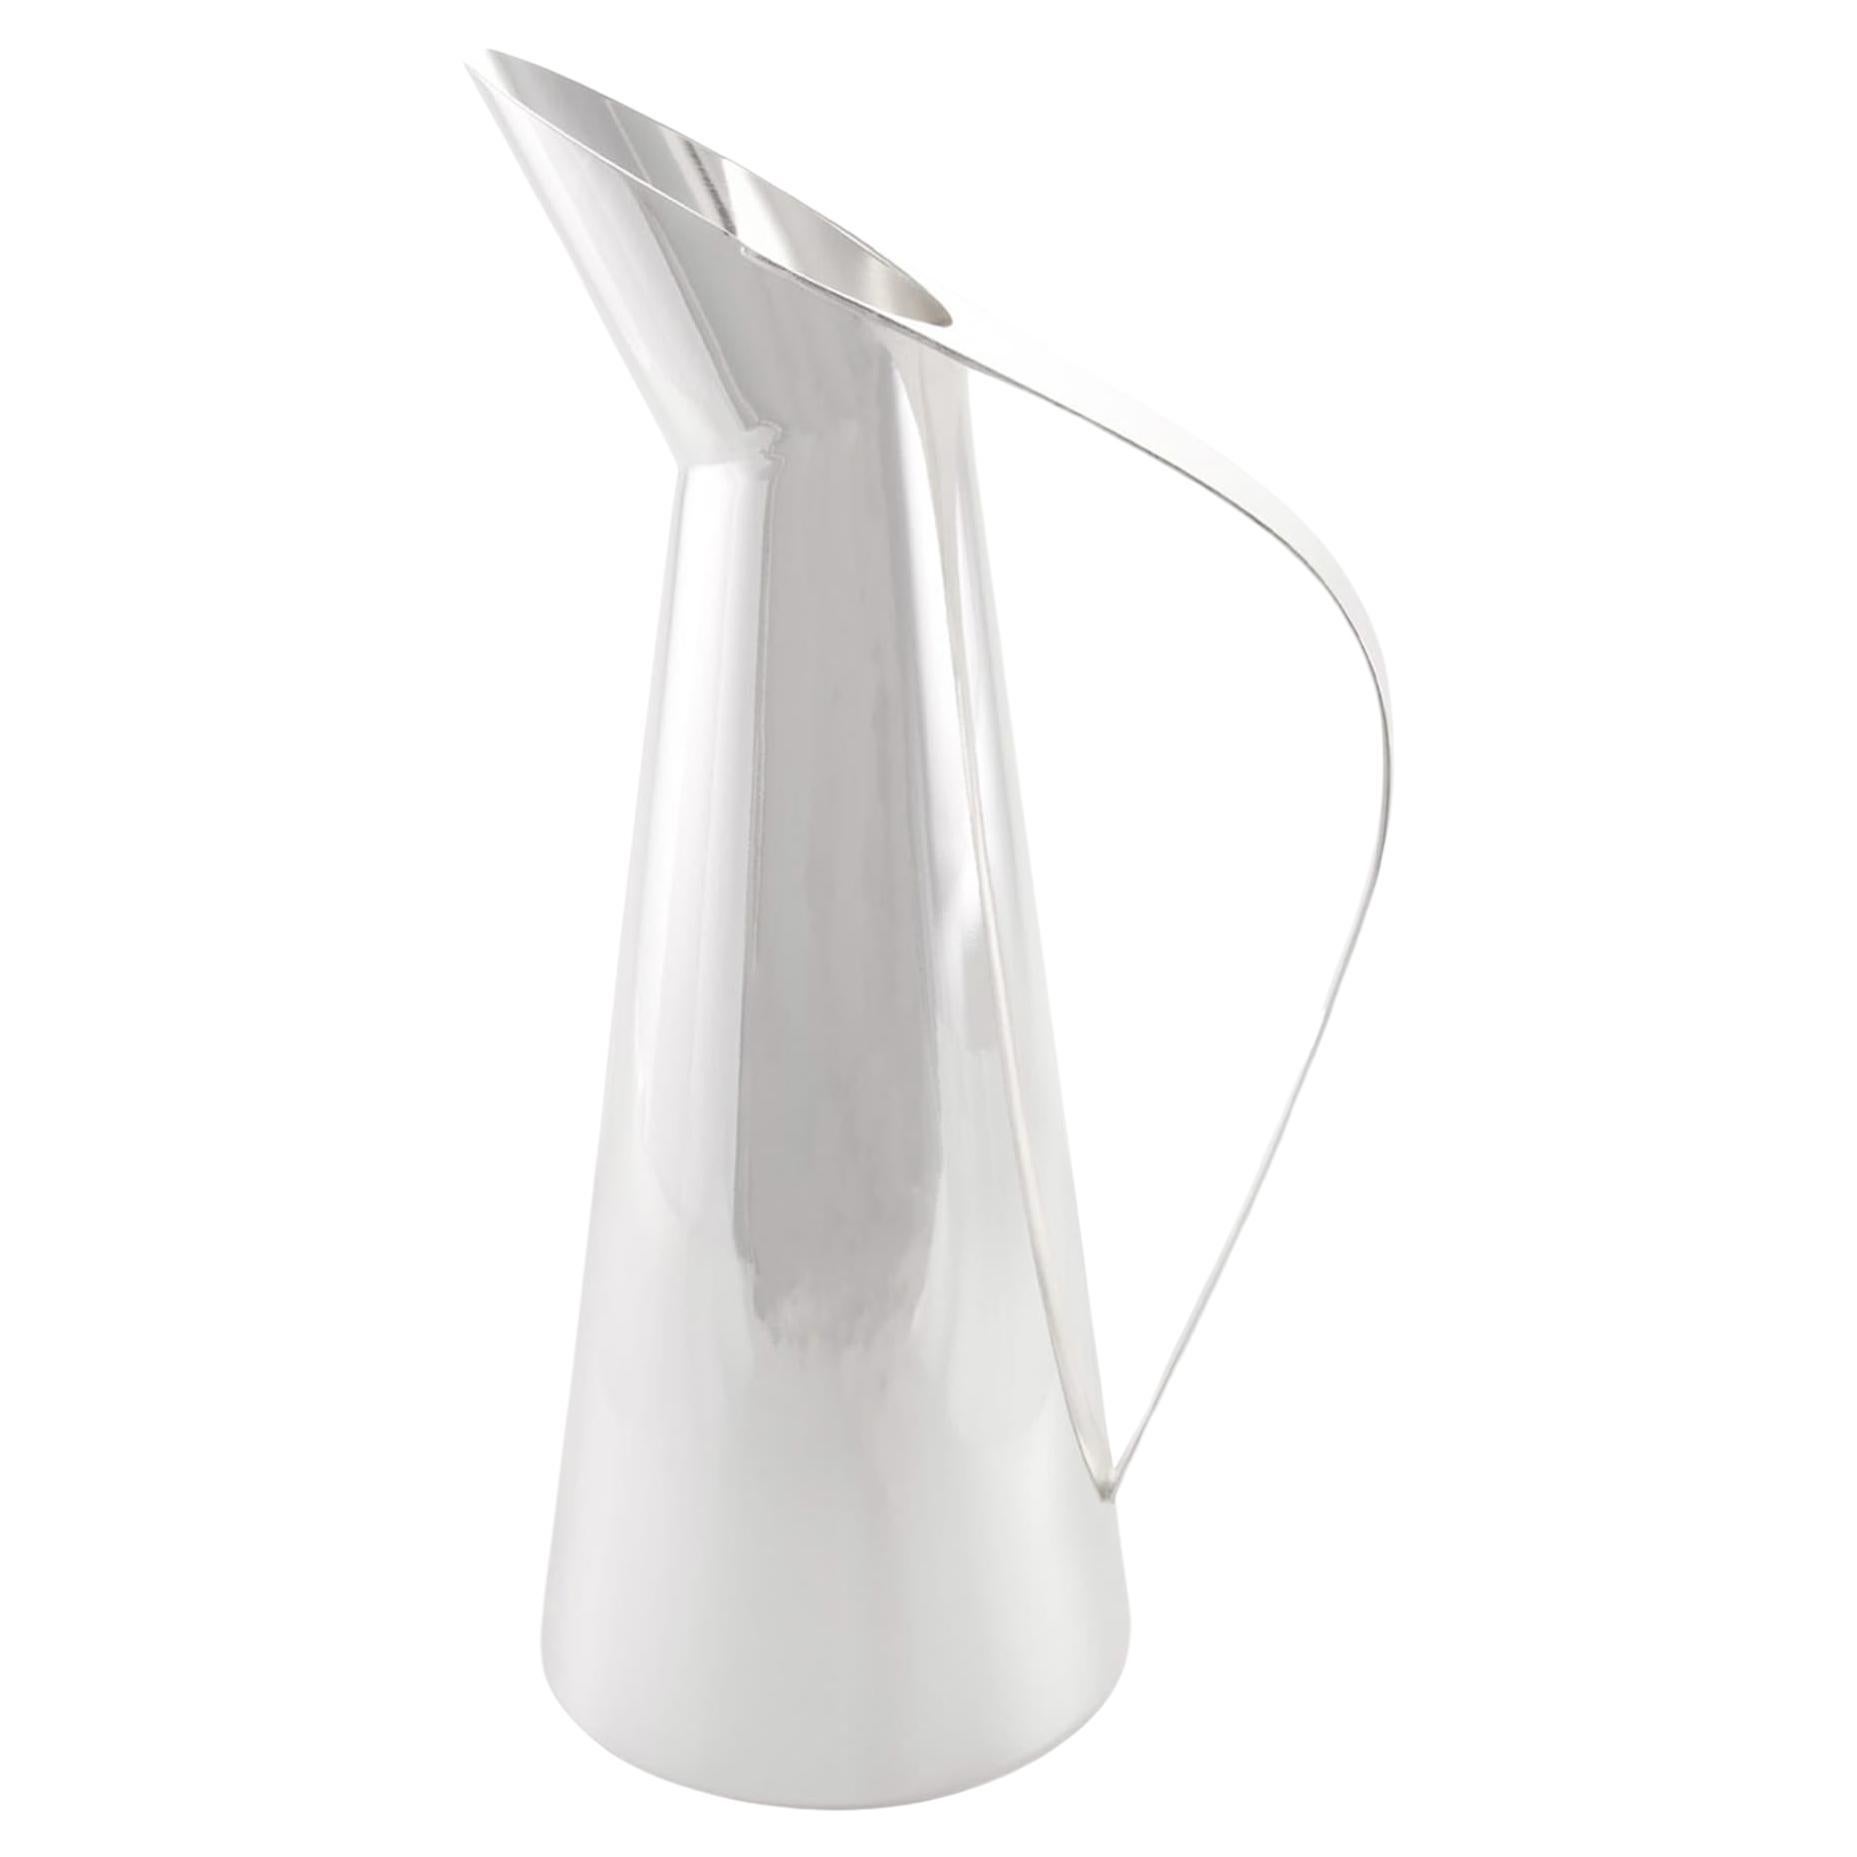 Itamar Silvery Pitcher by Itamar Harari For Sale